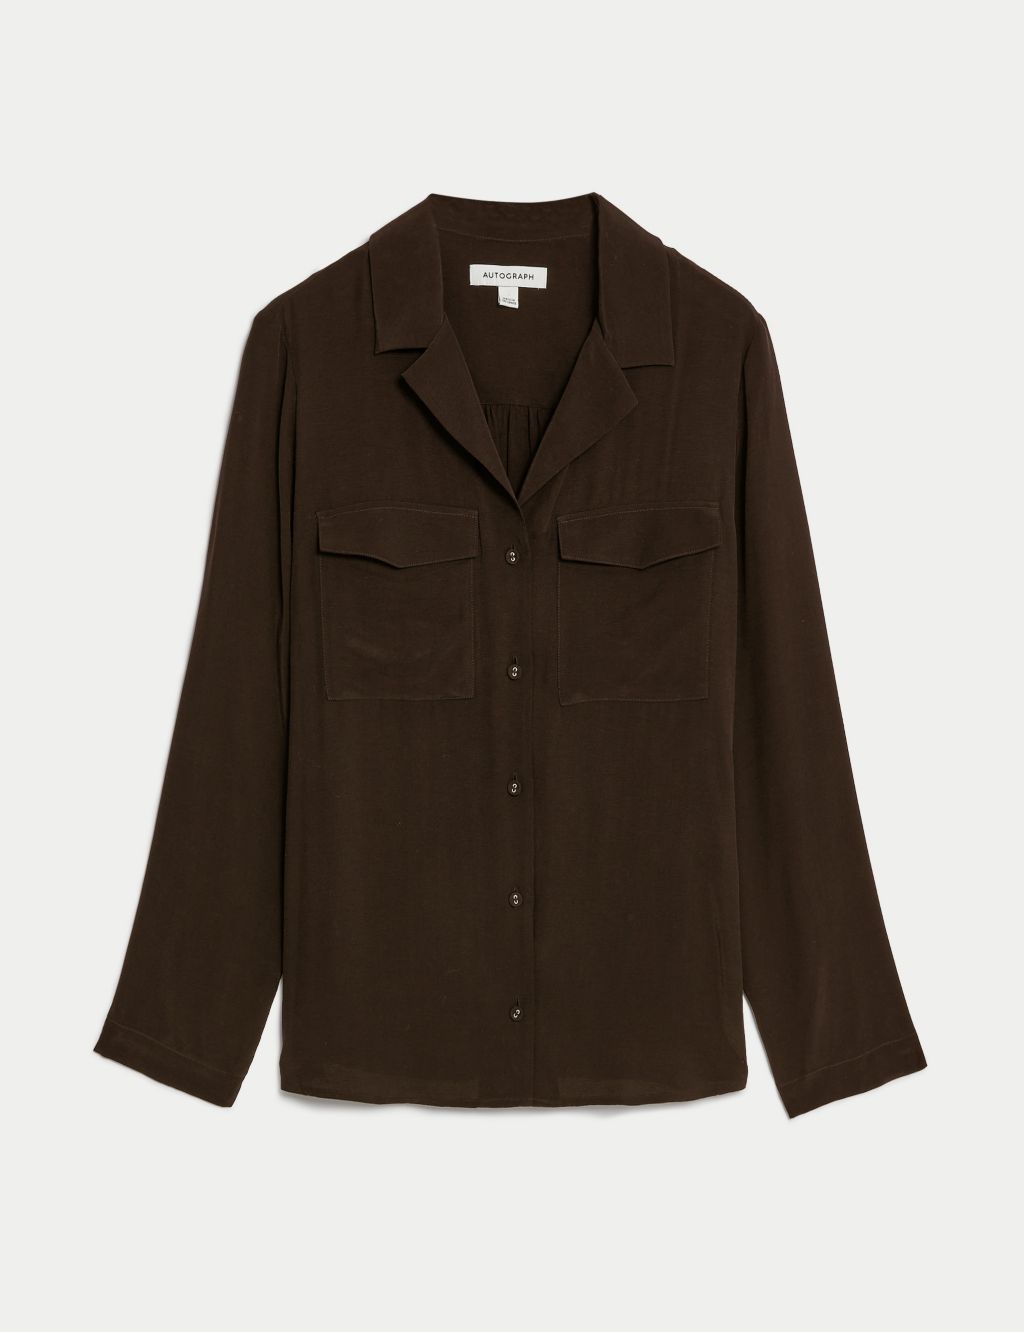 Cupro Rich Collared Shirt image 1